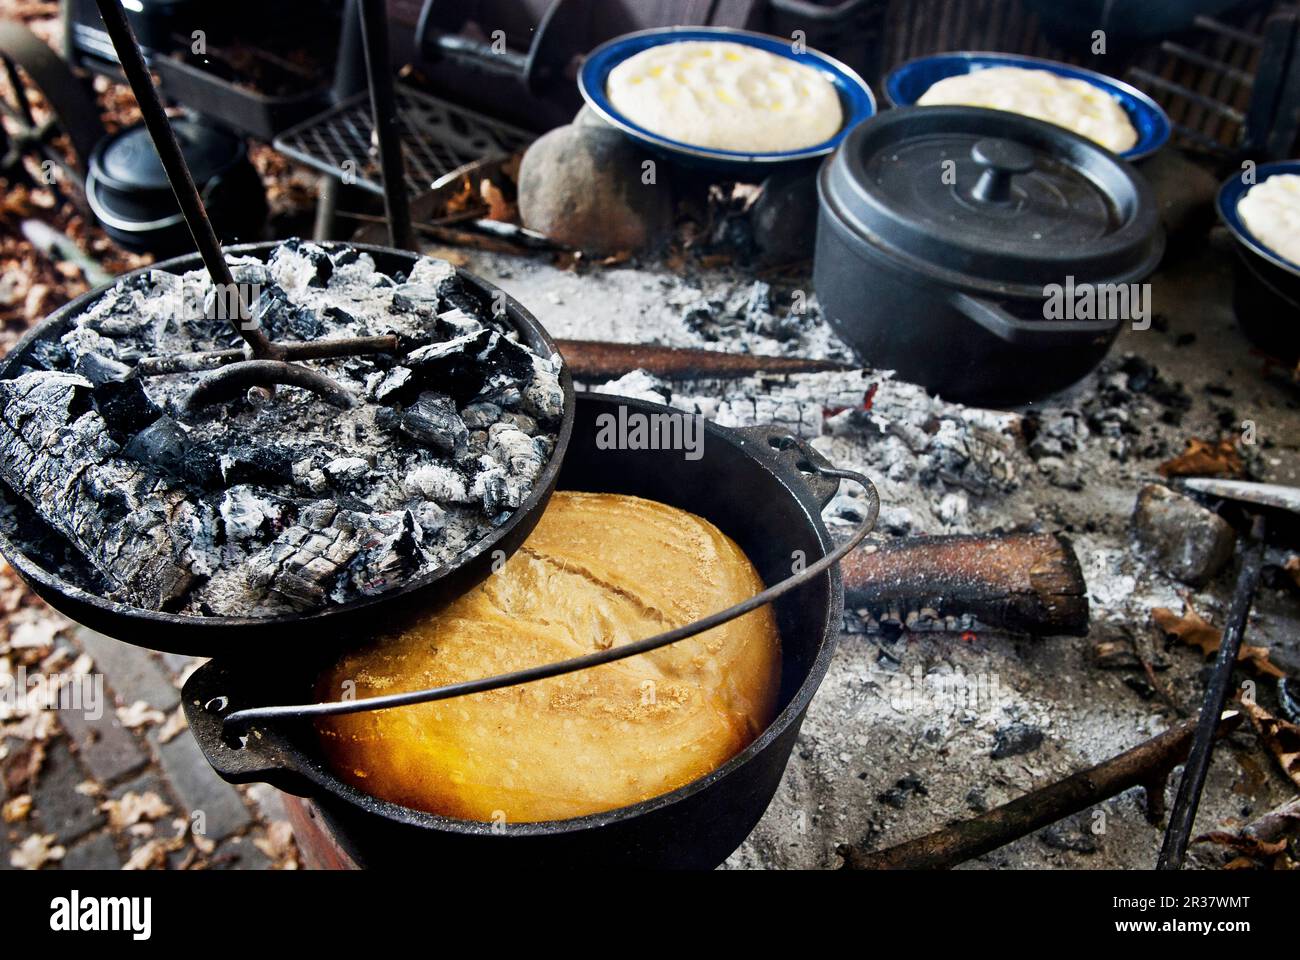 https://c8.alamy.com/comp/2R37WMT/baking-bread-in-a-dutch-oven-over-a-fire-place-camping-2R37WMT.jpg